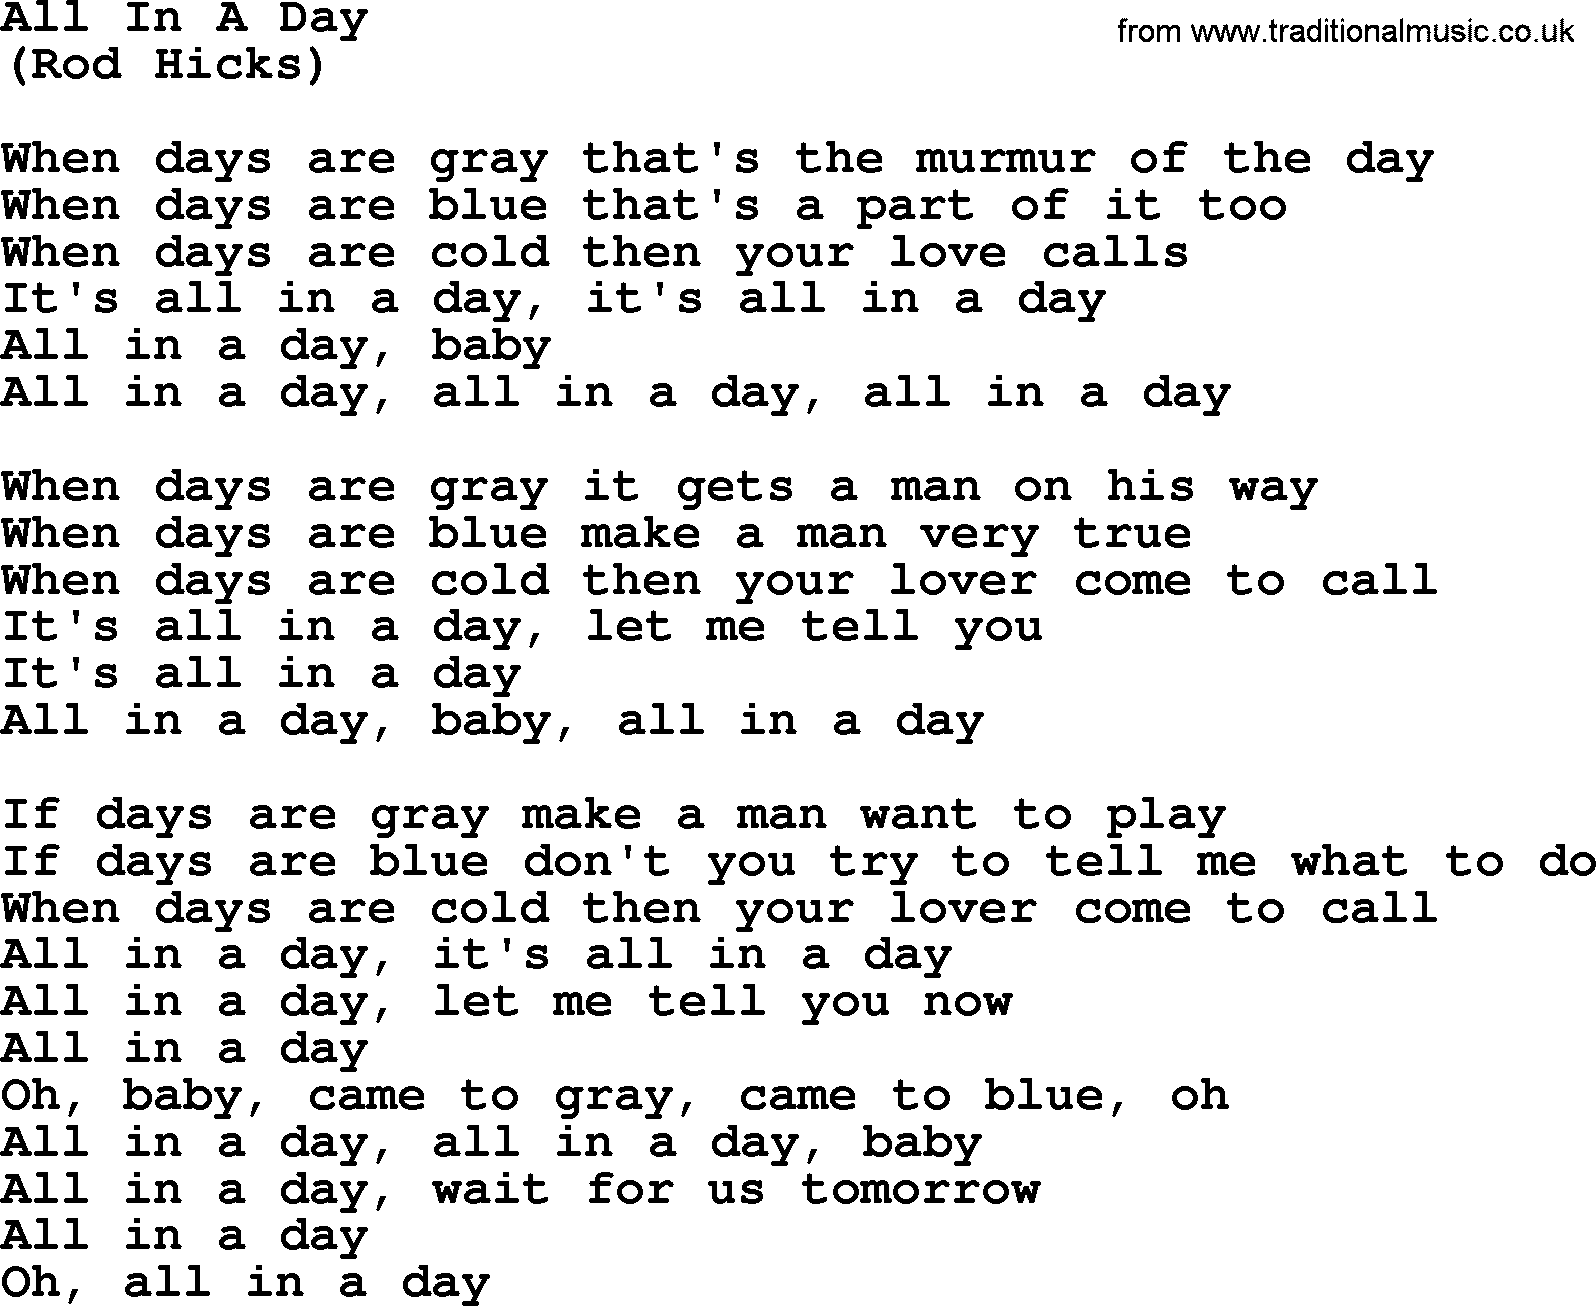 The Byrds song All In A Day, lyrics